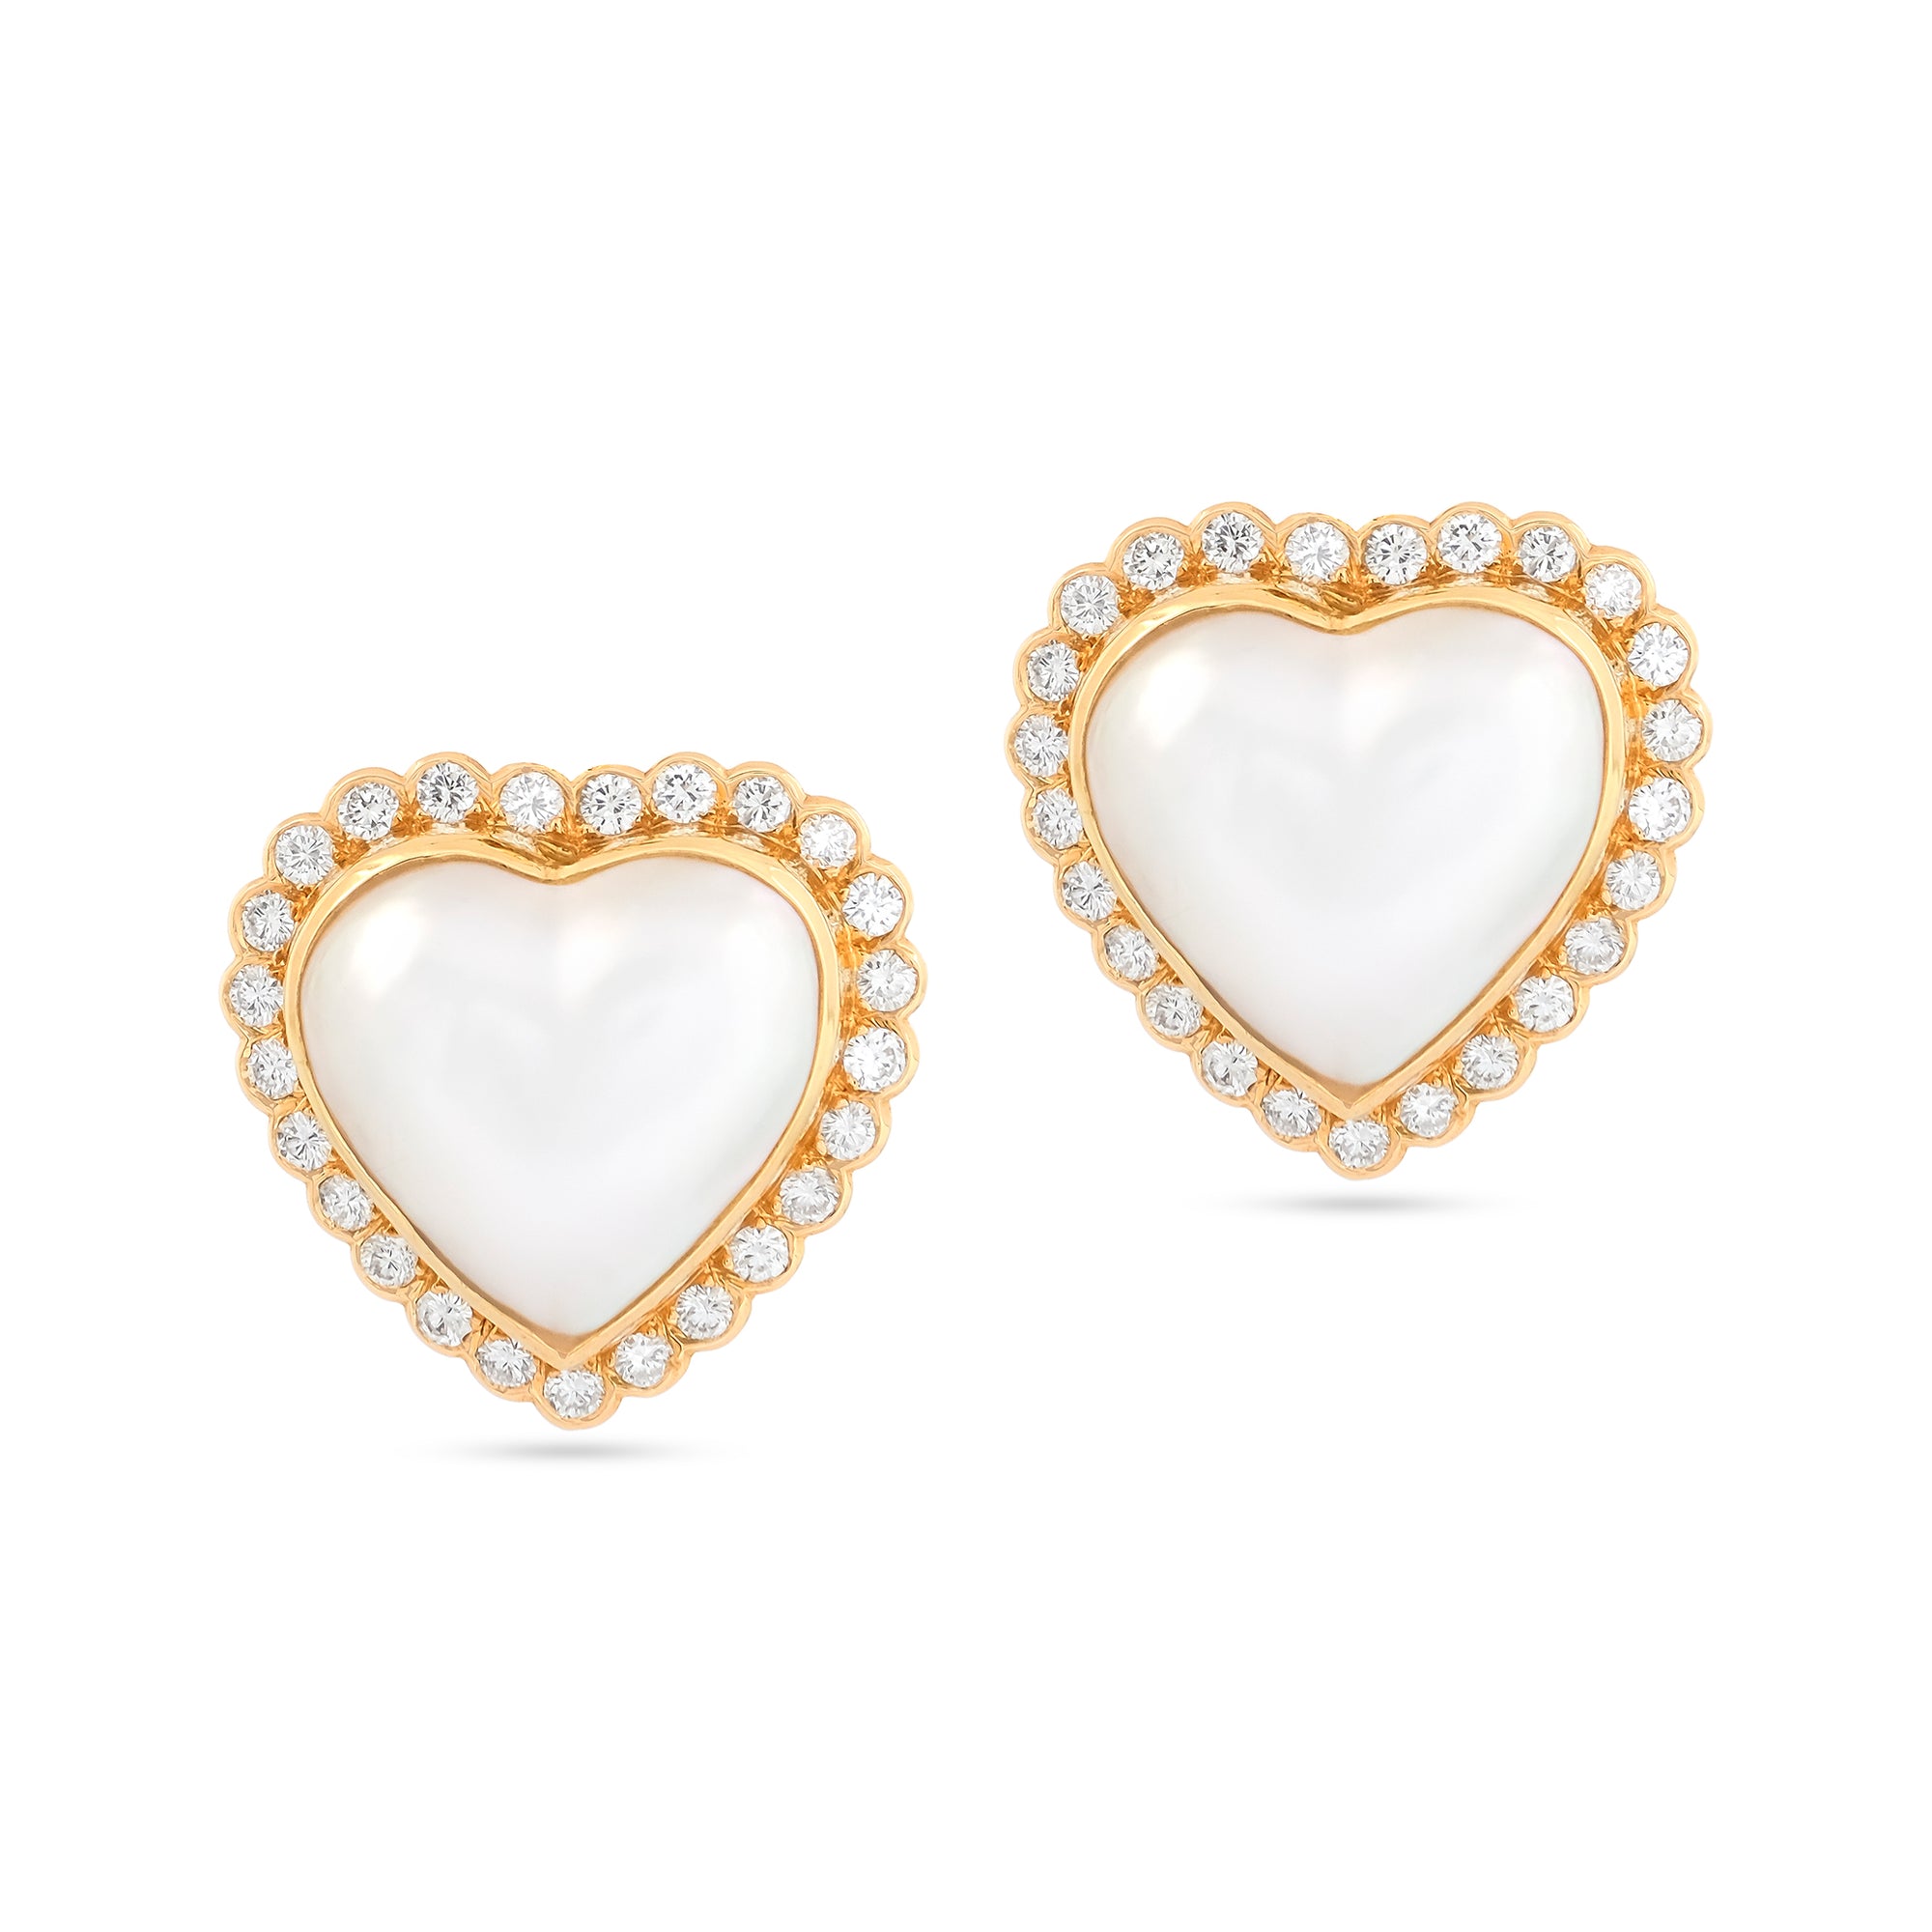 Boodles 18ct Yellow Gold Diamond and Pearl Earrings